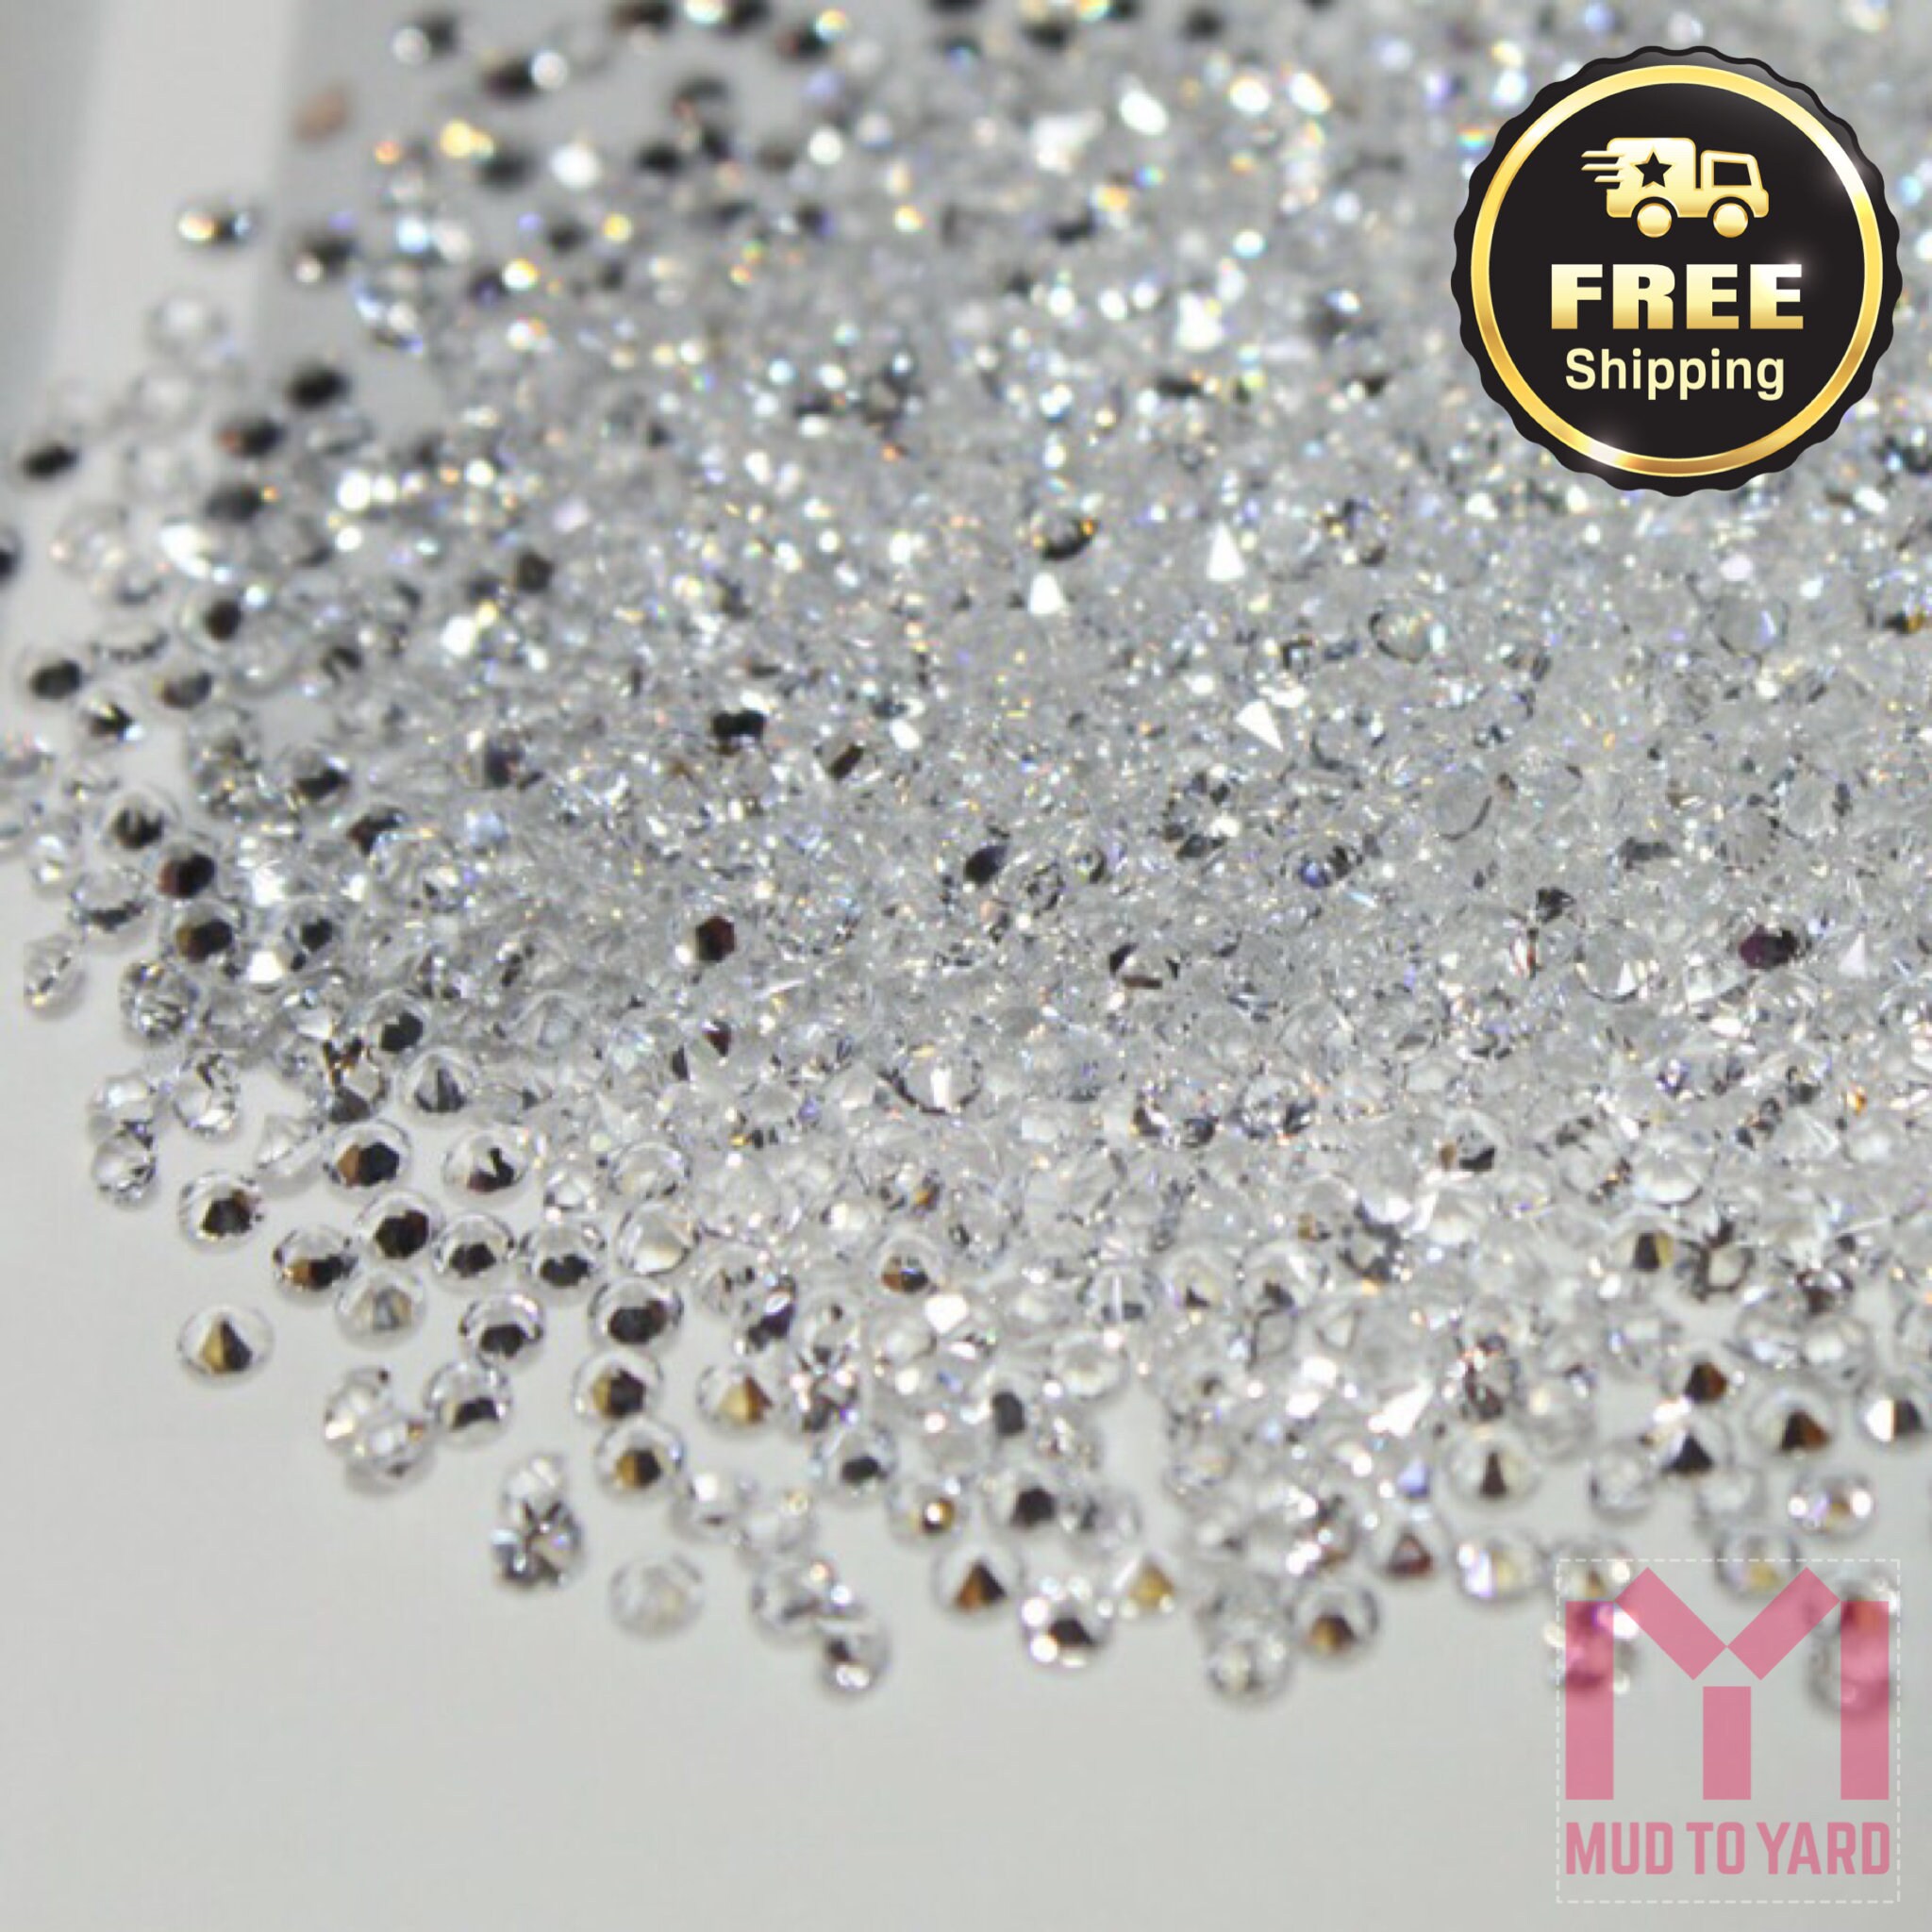 PREMIUM CRYSTALS DUST for Nails Crystal Pixie Dust Micro Zircon Nail  Rhinestones for Nail Art 1000 Crystals in Jar Small Gift Idea for Her 